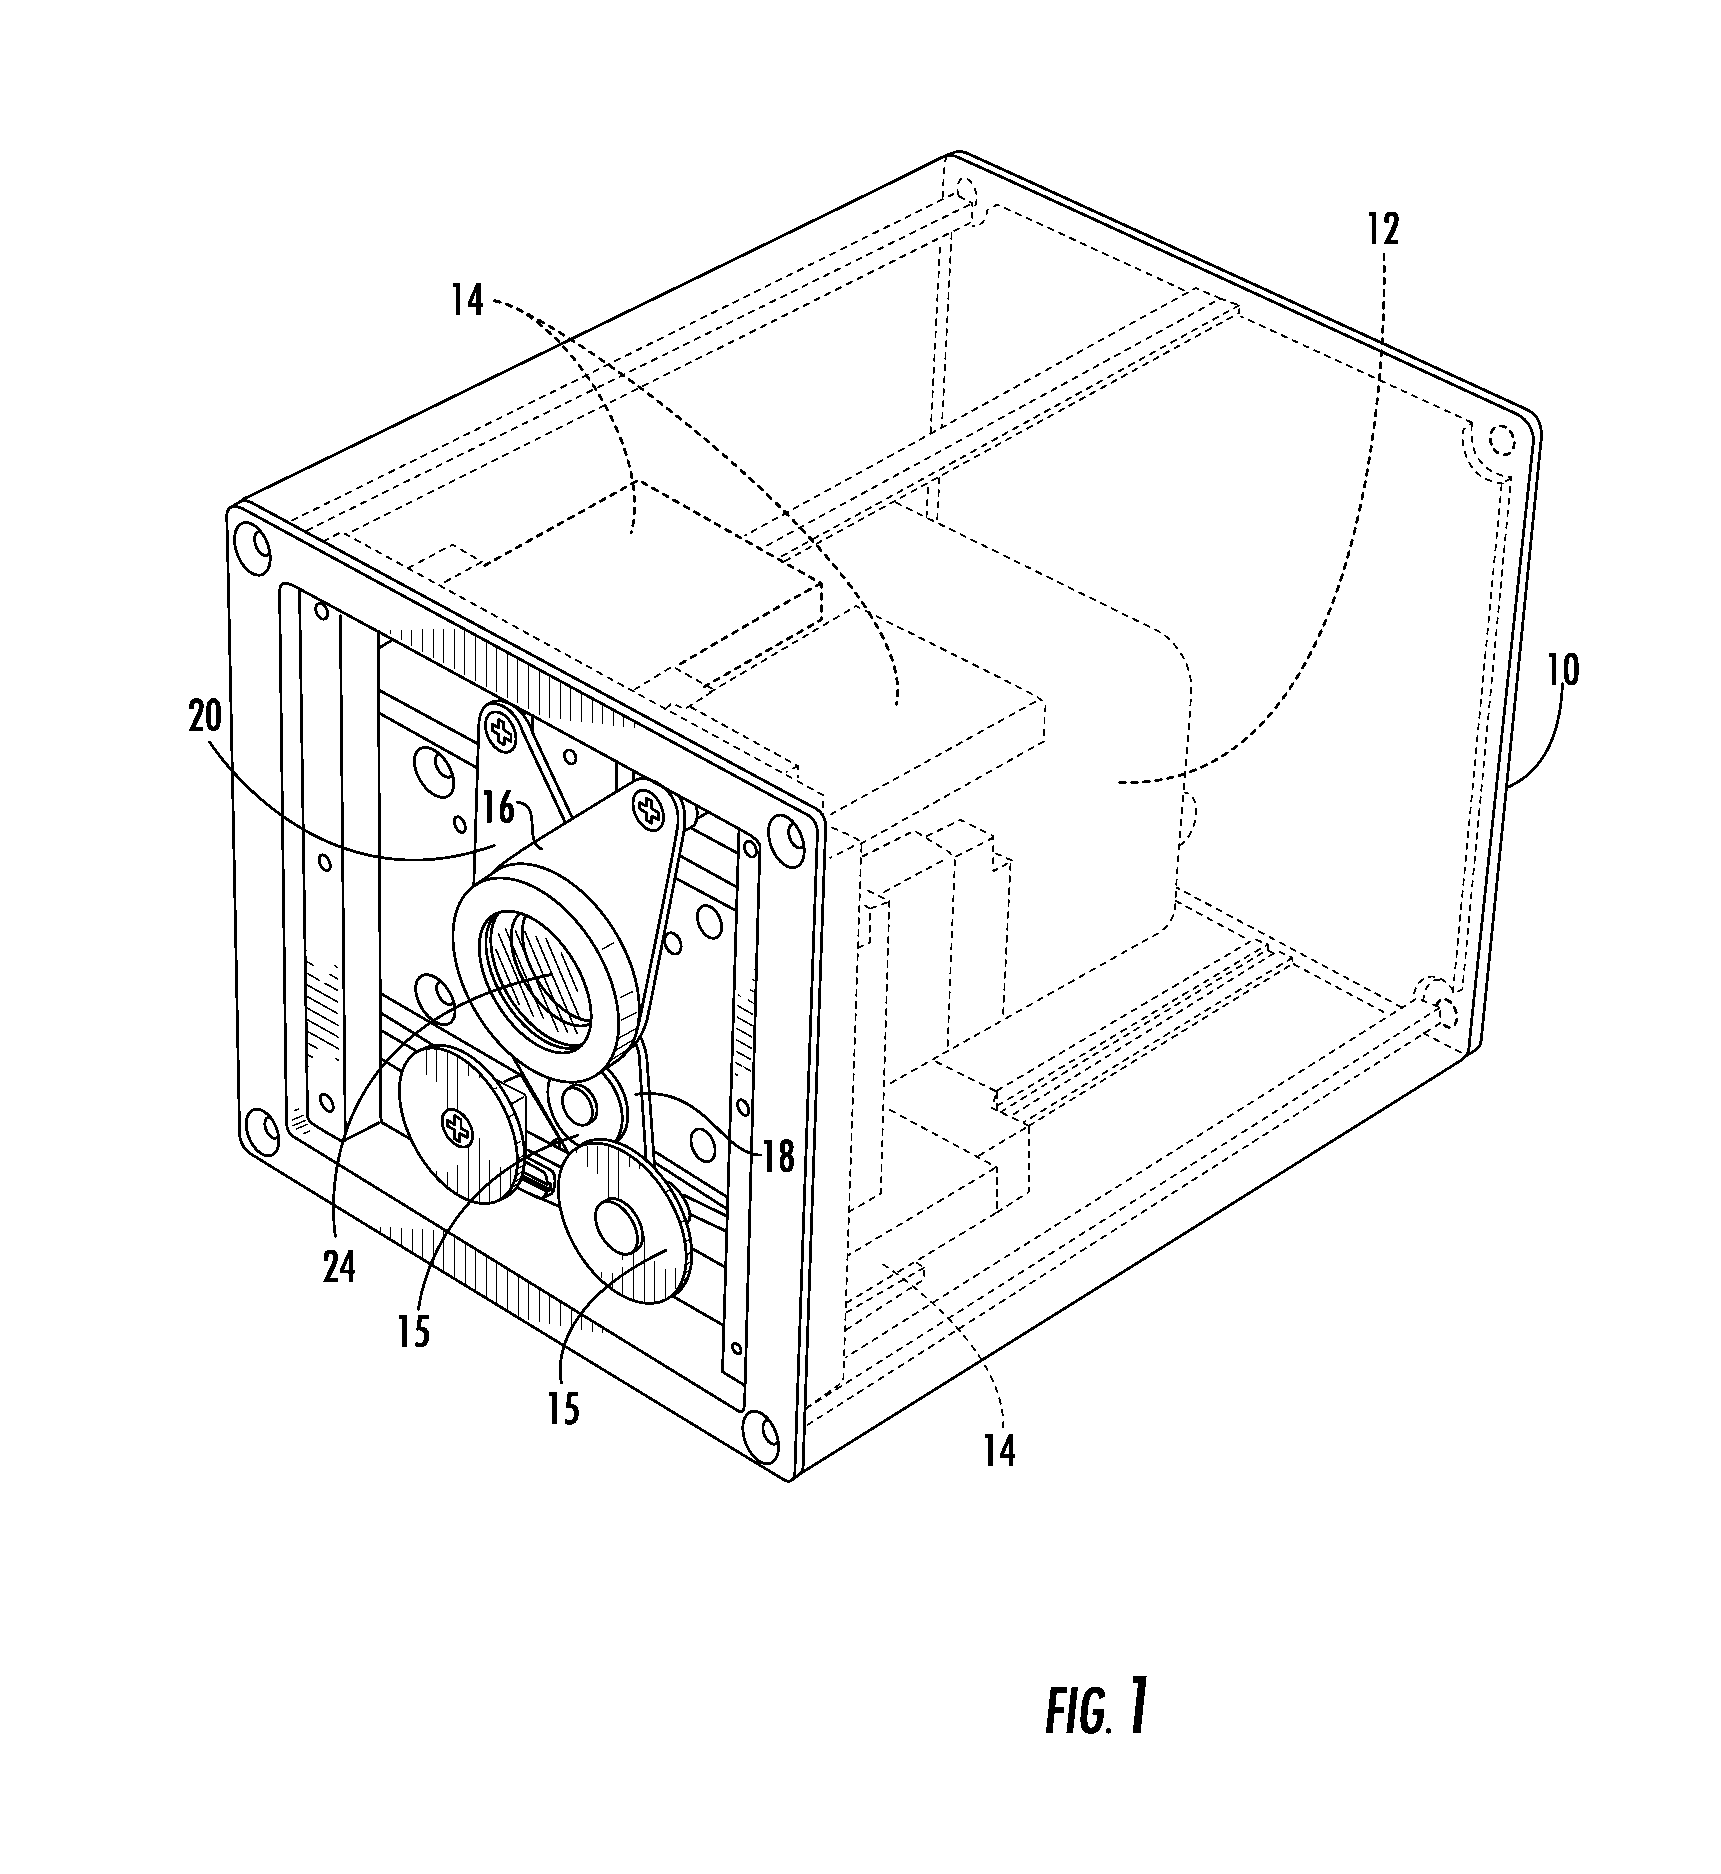 Filter assembly and image enhancement system for a surveillance camera and method of using the same